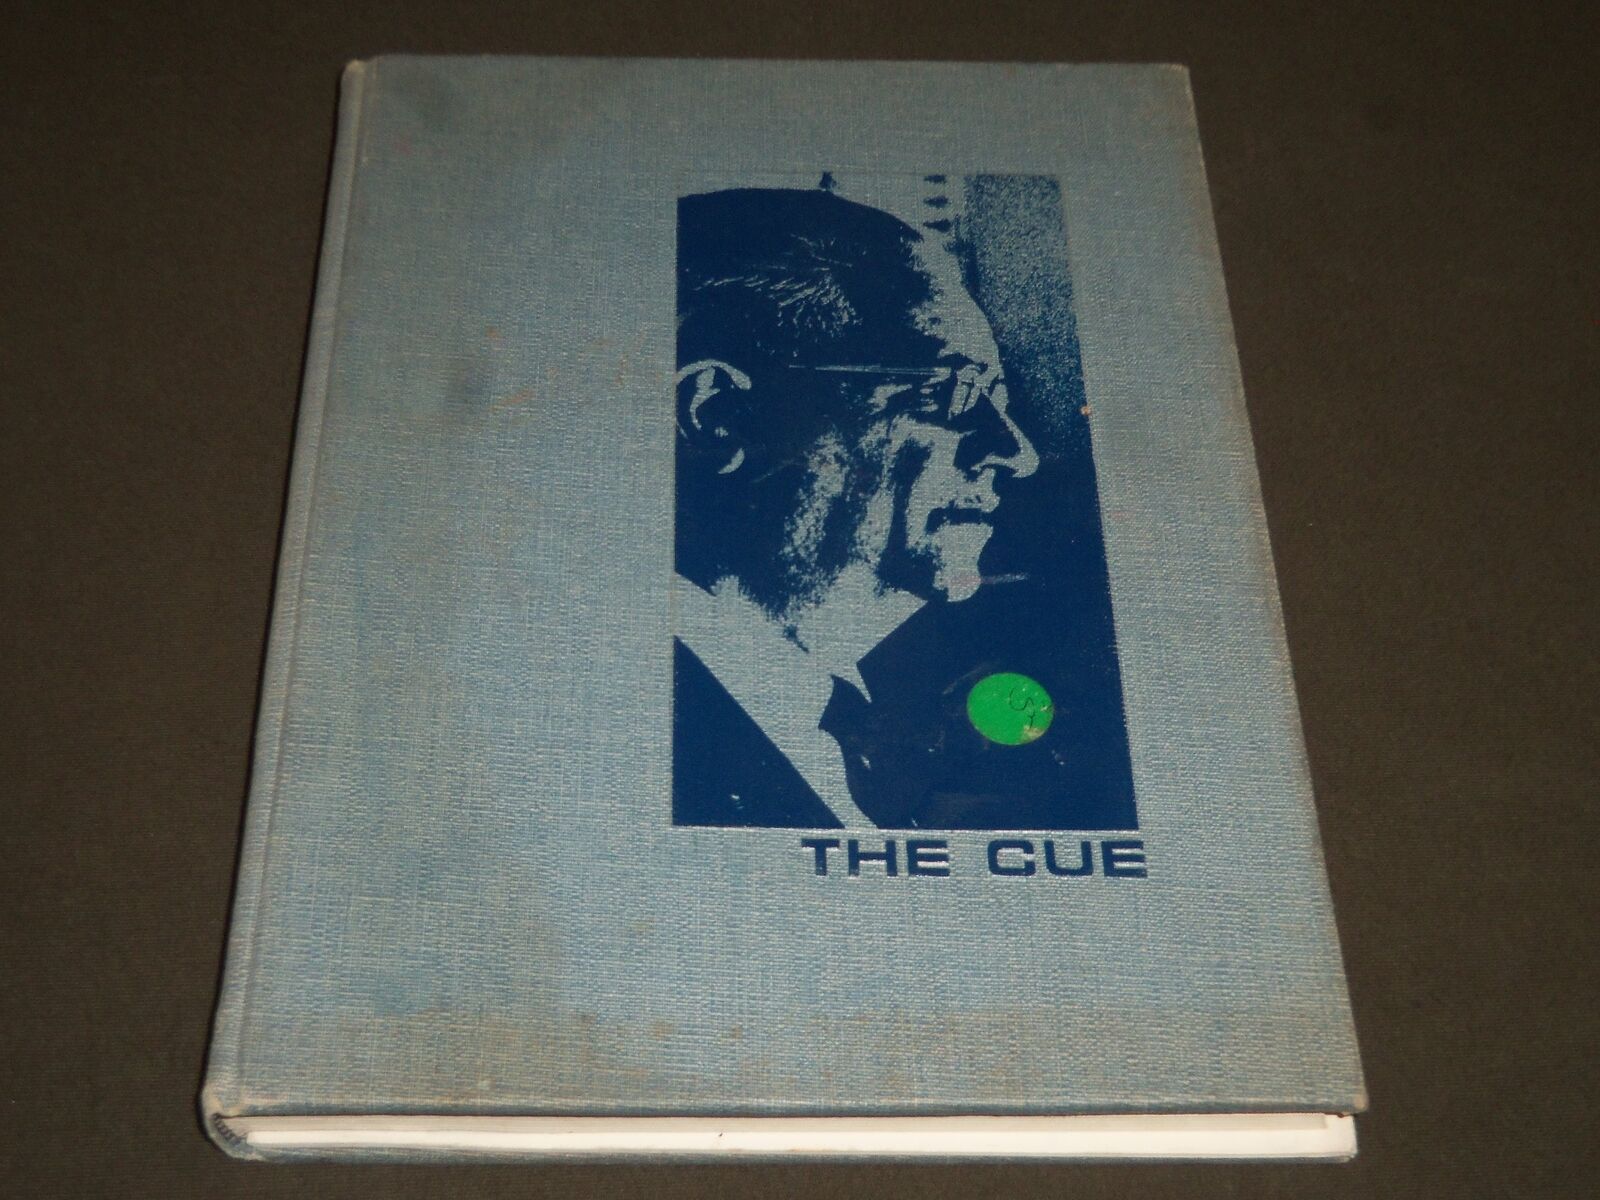 1963 THE CUE ALBRIGHT COLLEGE YEARBOOK - READING, PA - NICE PHOTOS - YB 980